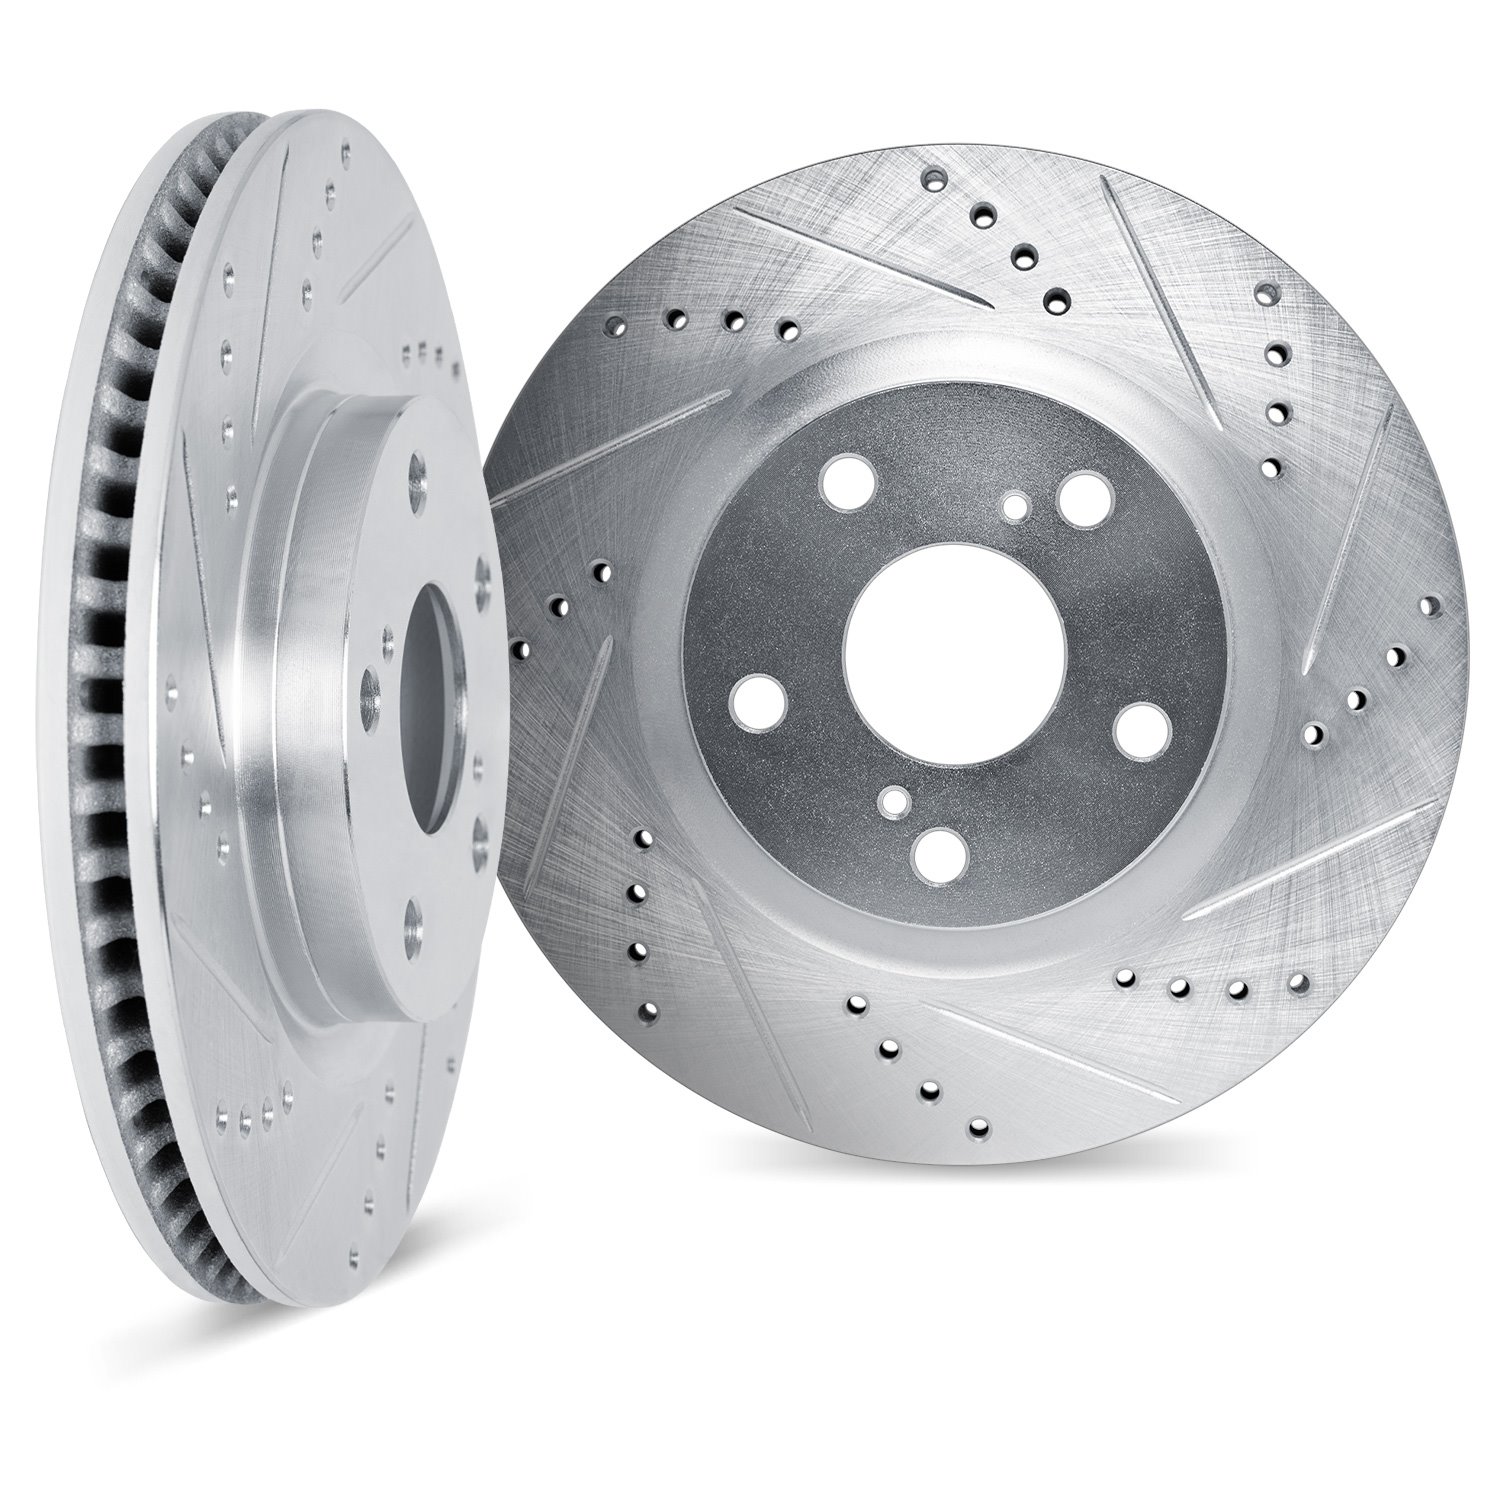 7002-75035 Drilled/Slotted Brake Rotors [Silver], Fits Select Lexus/Toyota/Scion, Position: Rear